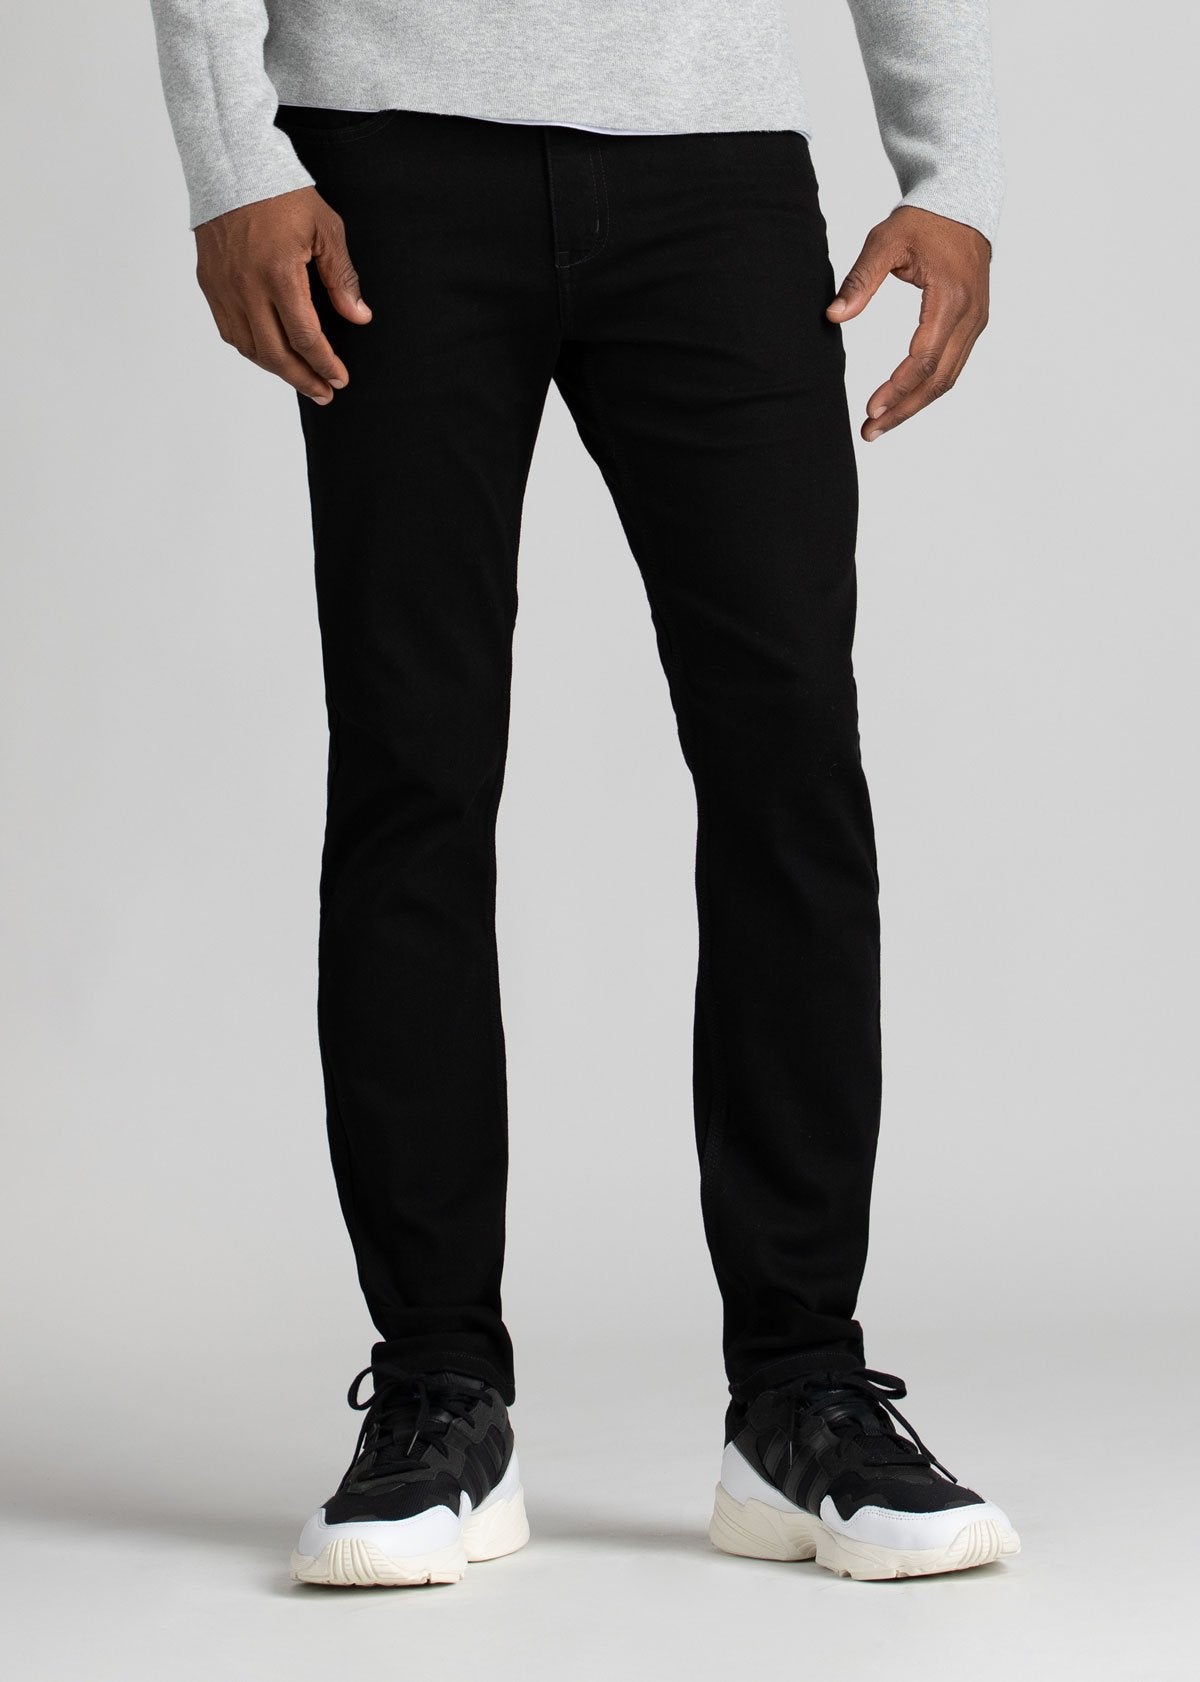 black water resistant stretch jeans front